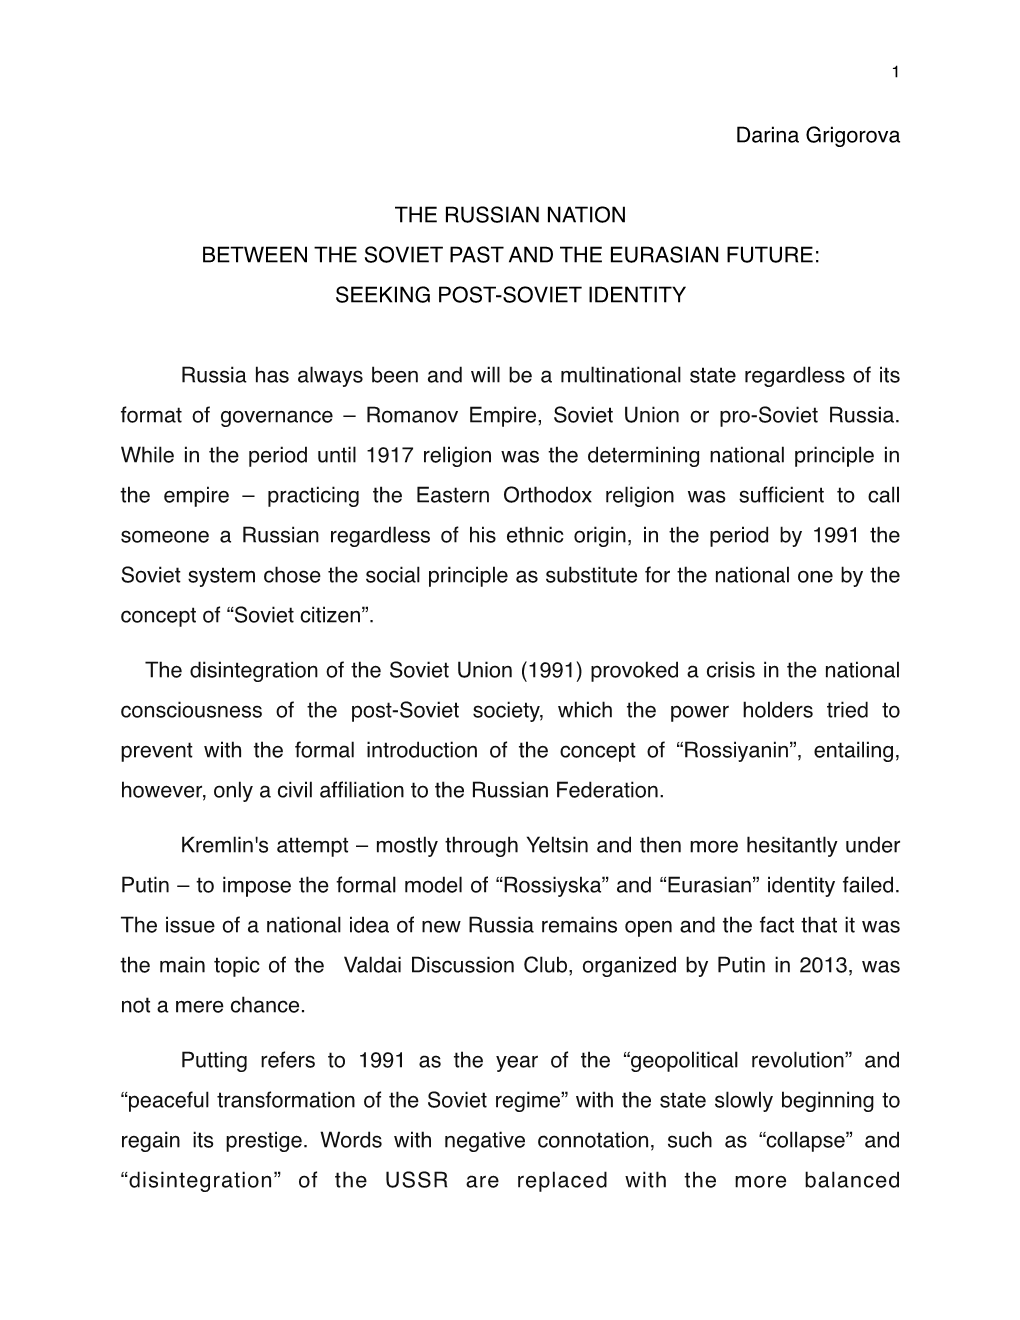 The Russian Nation Between the Soviet Past and the Eurasian Future: Seeking Post-Soviet Identity